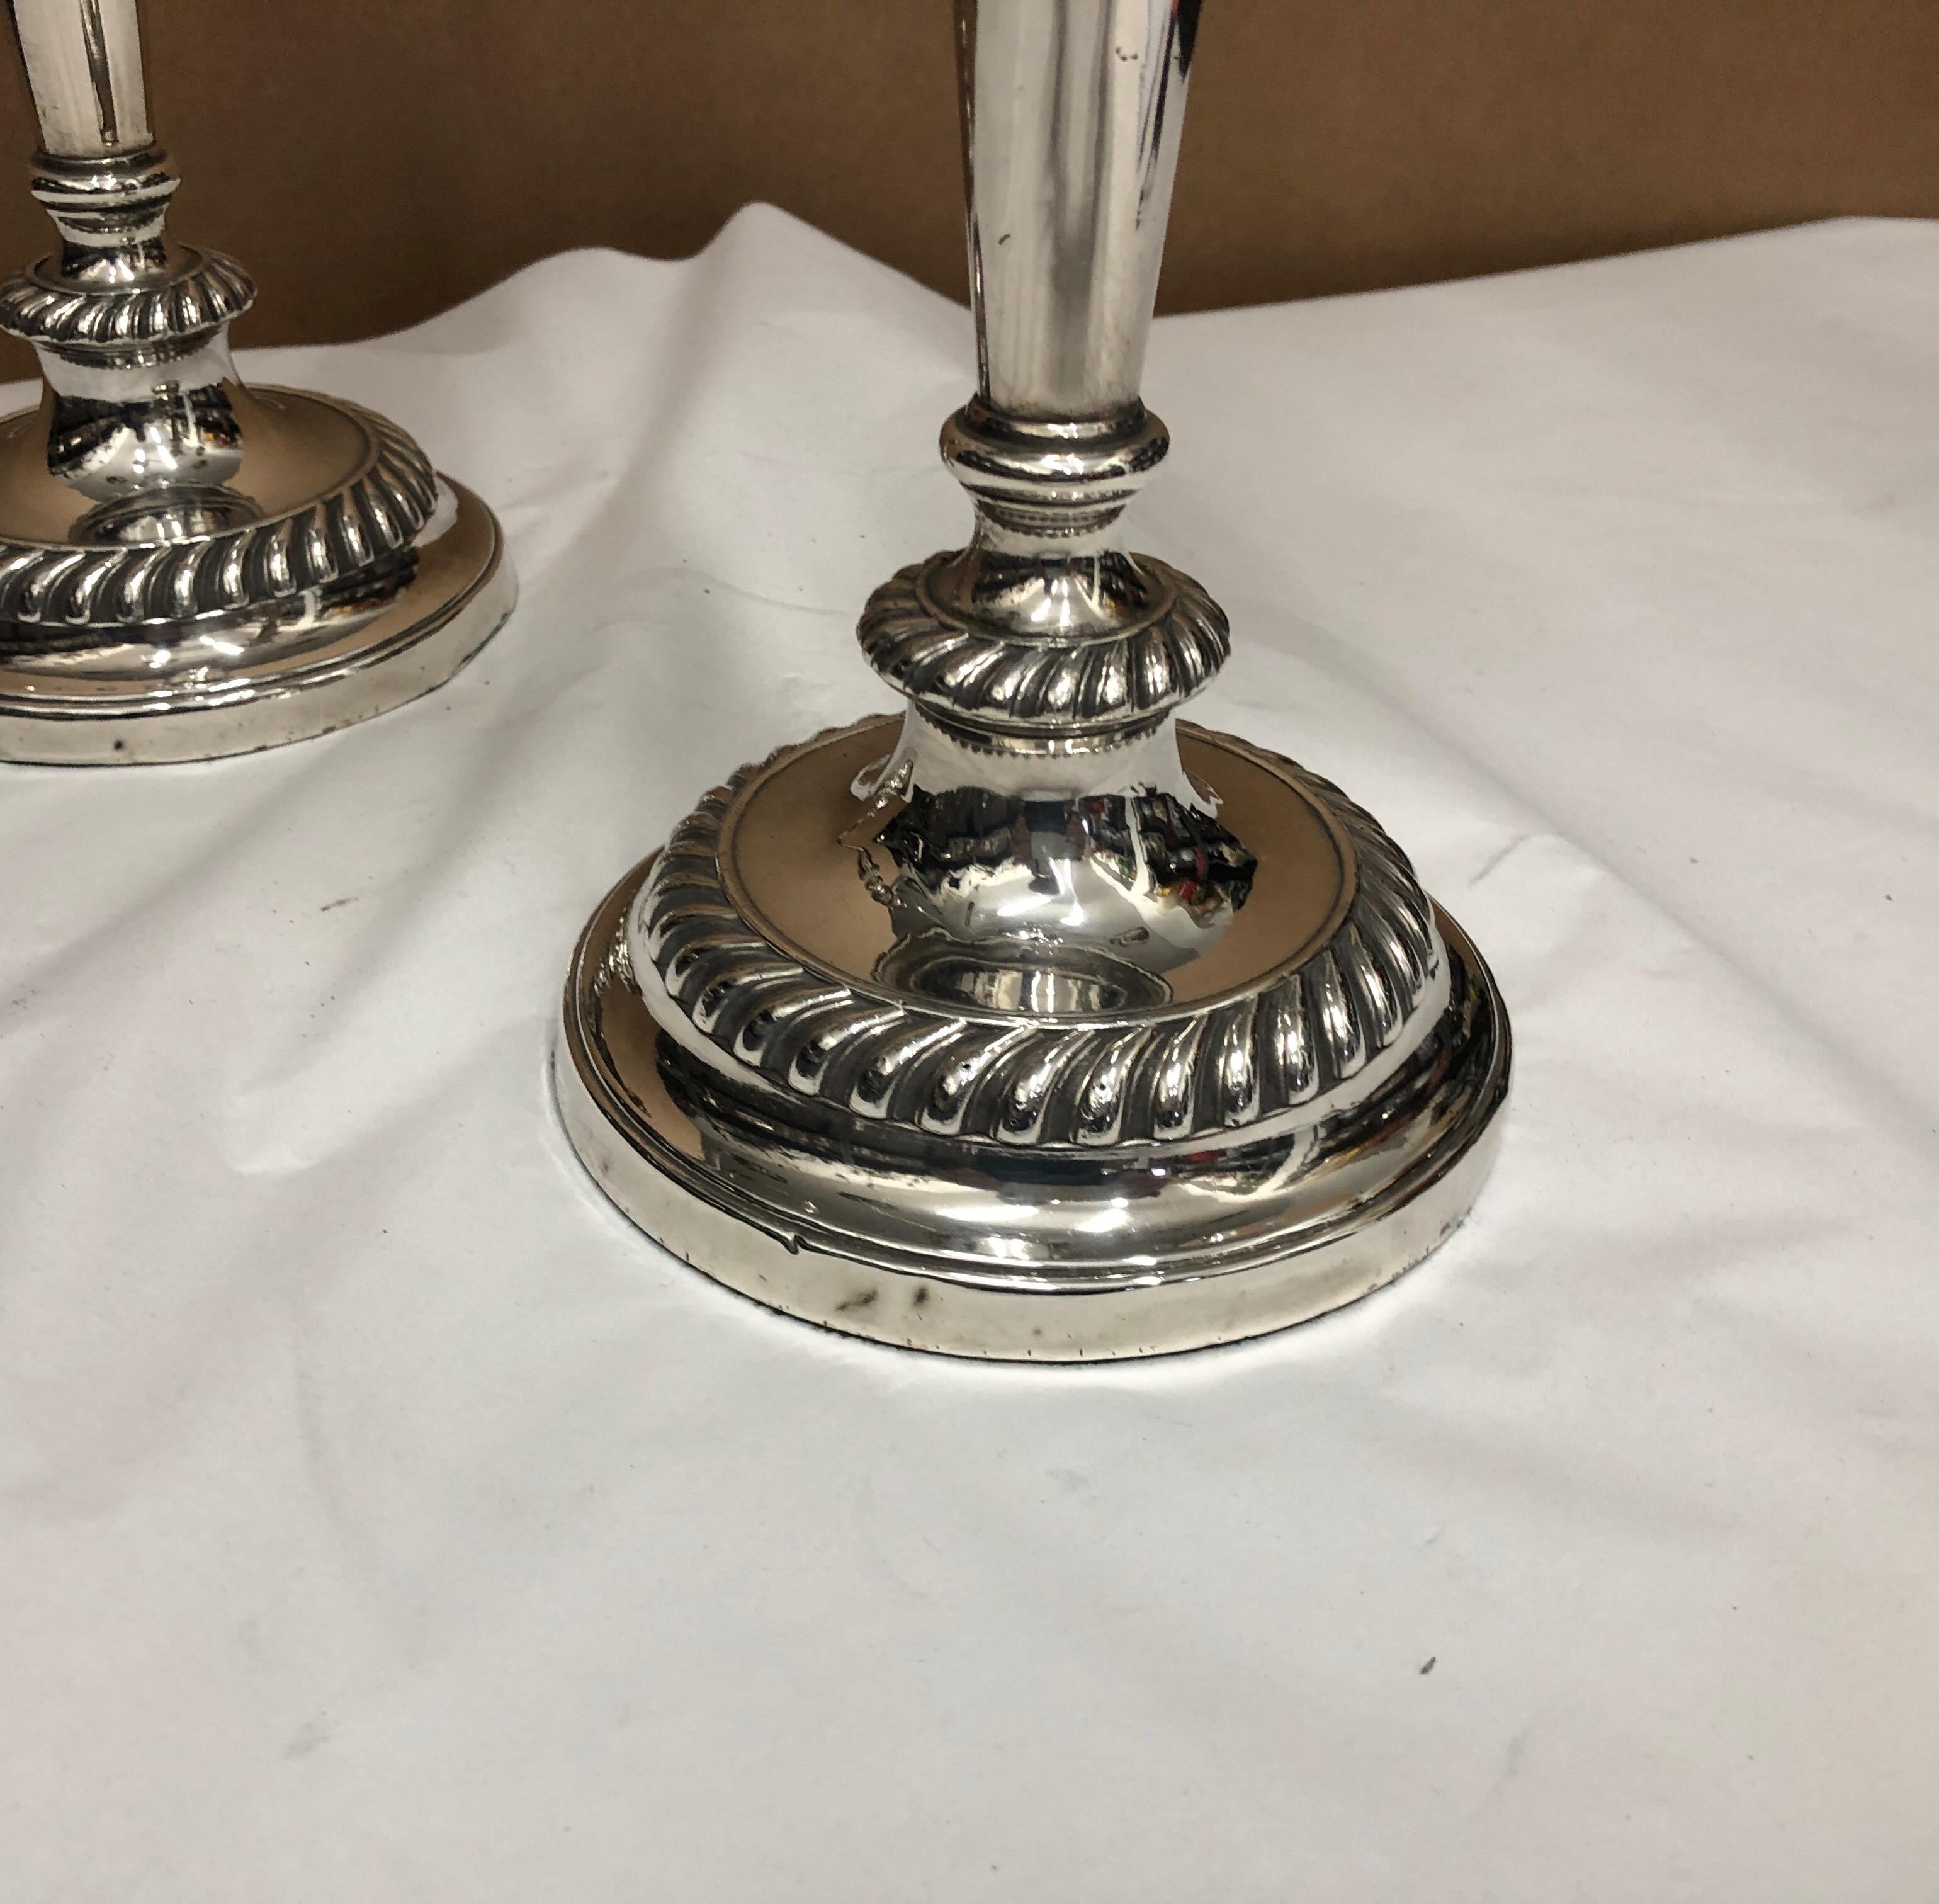 Two candelabras in old sheffield plate made in England in 1830. It's possible use them also us candlesticks.